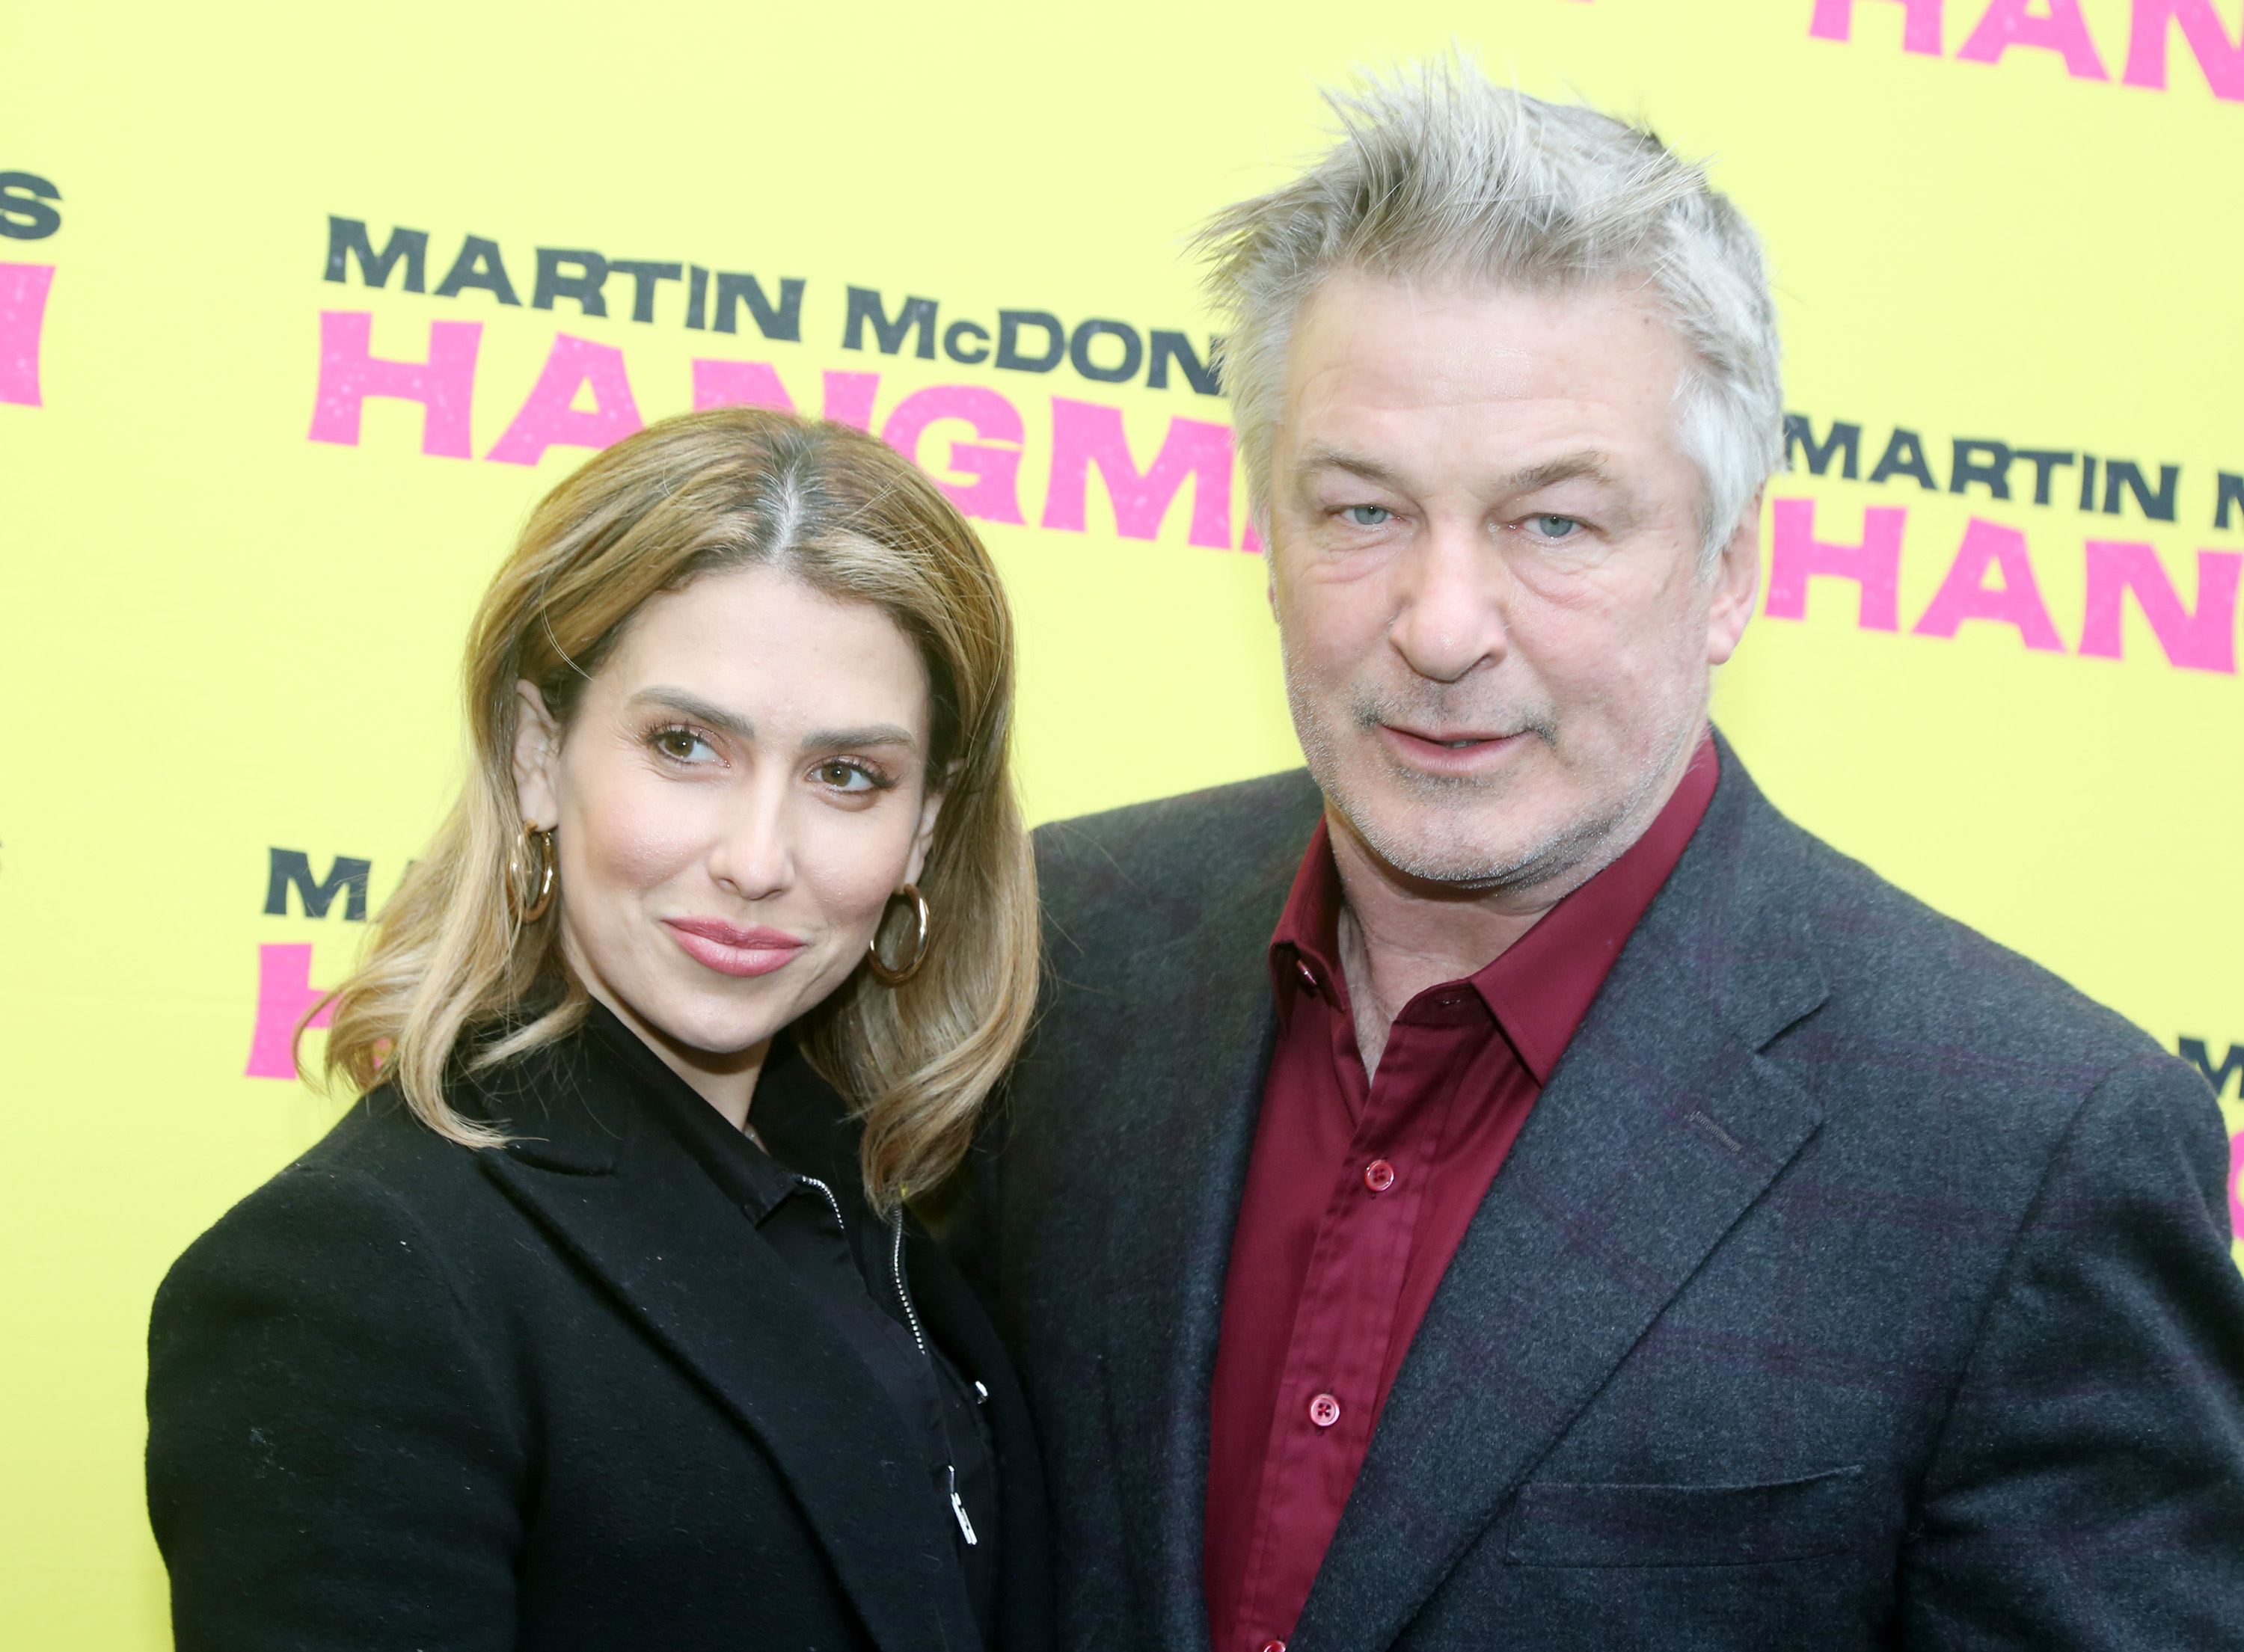 <p><span>There's a nearly 26-year age difference between <a href="https://www.wonderwall.com/celebrity/profiles/overview/alec-baldwin-226.article">Alec Baldwin</a> and his second wife, former yoga instructor Hilaria Baldwin. They wed in 2012 when he was 54 and she was 28. Hilaria -- who now shares seven children with Alec -- opened up about their big age gap on the debut episode of her "Witches Anonymous" podcast in November 2022, admitting that before she fell for the actor, "I would judge women and men that had big age differences. I would look at it like, this older man wants some young bimbo with no opinions whatsoever." She thought the women were "like whatever, 'I hope you die, and I'm going to take all your money,'" she added, but "now that I'm in that relationship and people will say those things about me regularly, I realize, what was this trained into my head? Why was I so judgmental about other people who are literally just finding love? Maybe their love looks different from you and from your love or what I thought love would be but it doesn't make it not valid."</span></p><p>In June 2023, she again weighed in on their age difference. "Am I his mommy? Sometimes I'm his mommy. Sometimes," Hilaria admitted to <a href="https://www.romper.com/parenting/hilaria-baldwin-children-cover" rel="noreferrer noopener">Romper</a>. <span>"At the beginning of our relationship, everyone was like, 'She must have daddy issues because she's married to somebody older.' But it's actually the opposite."</span></p>